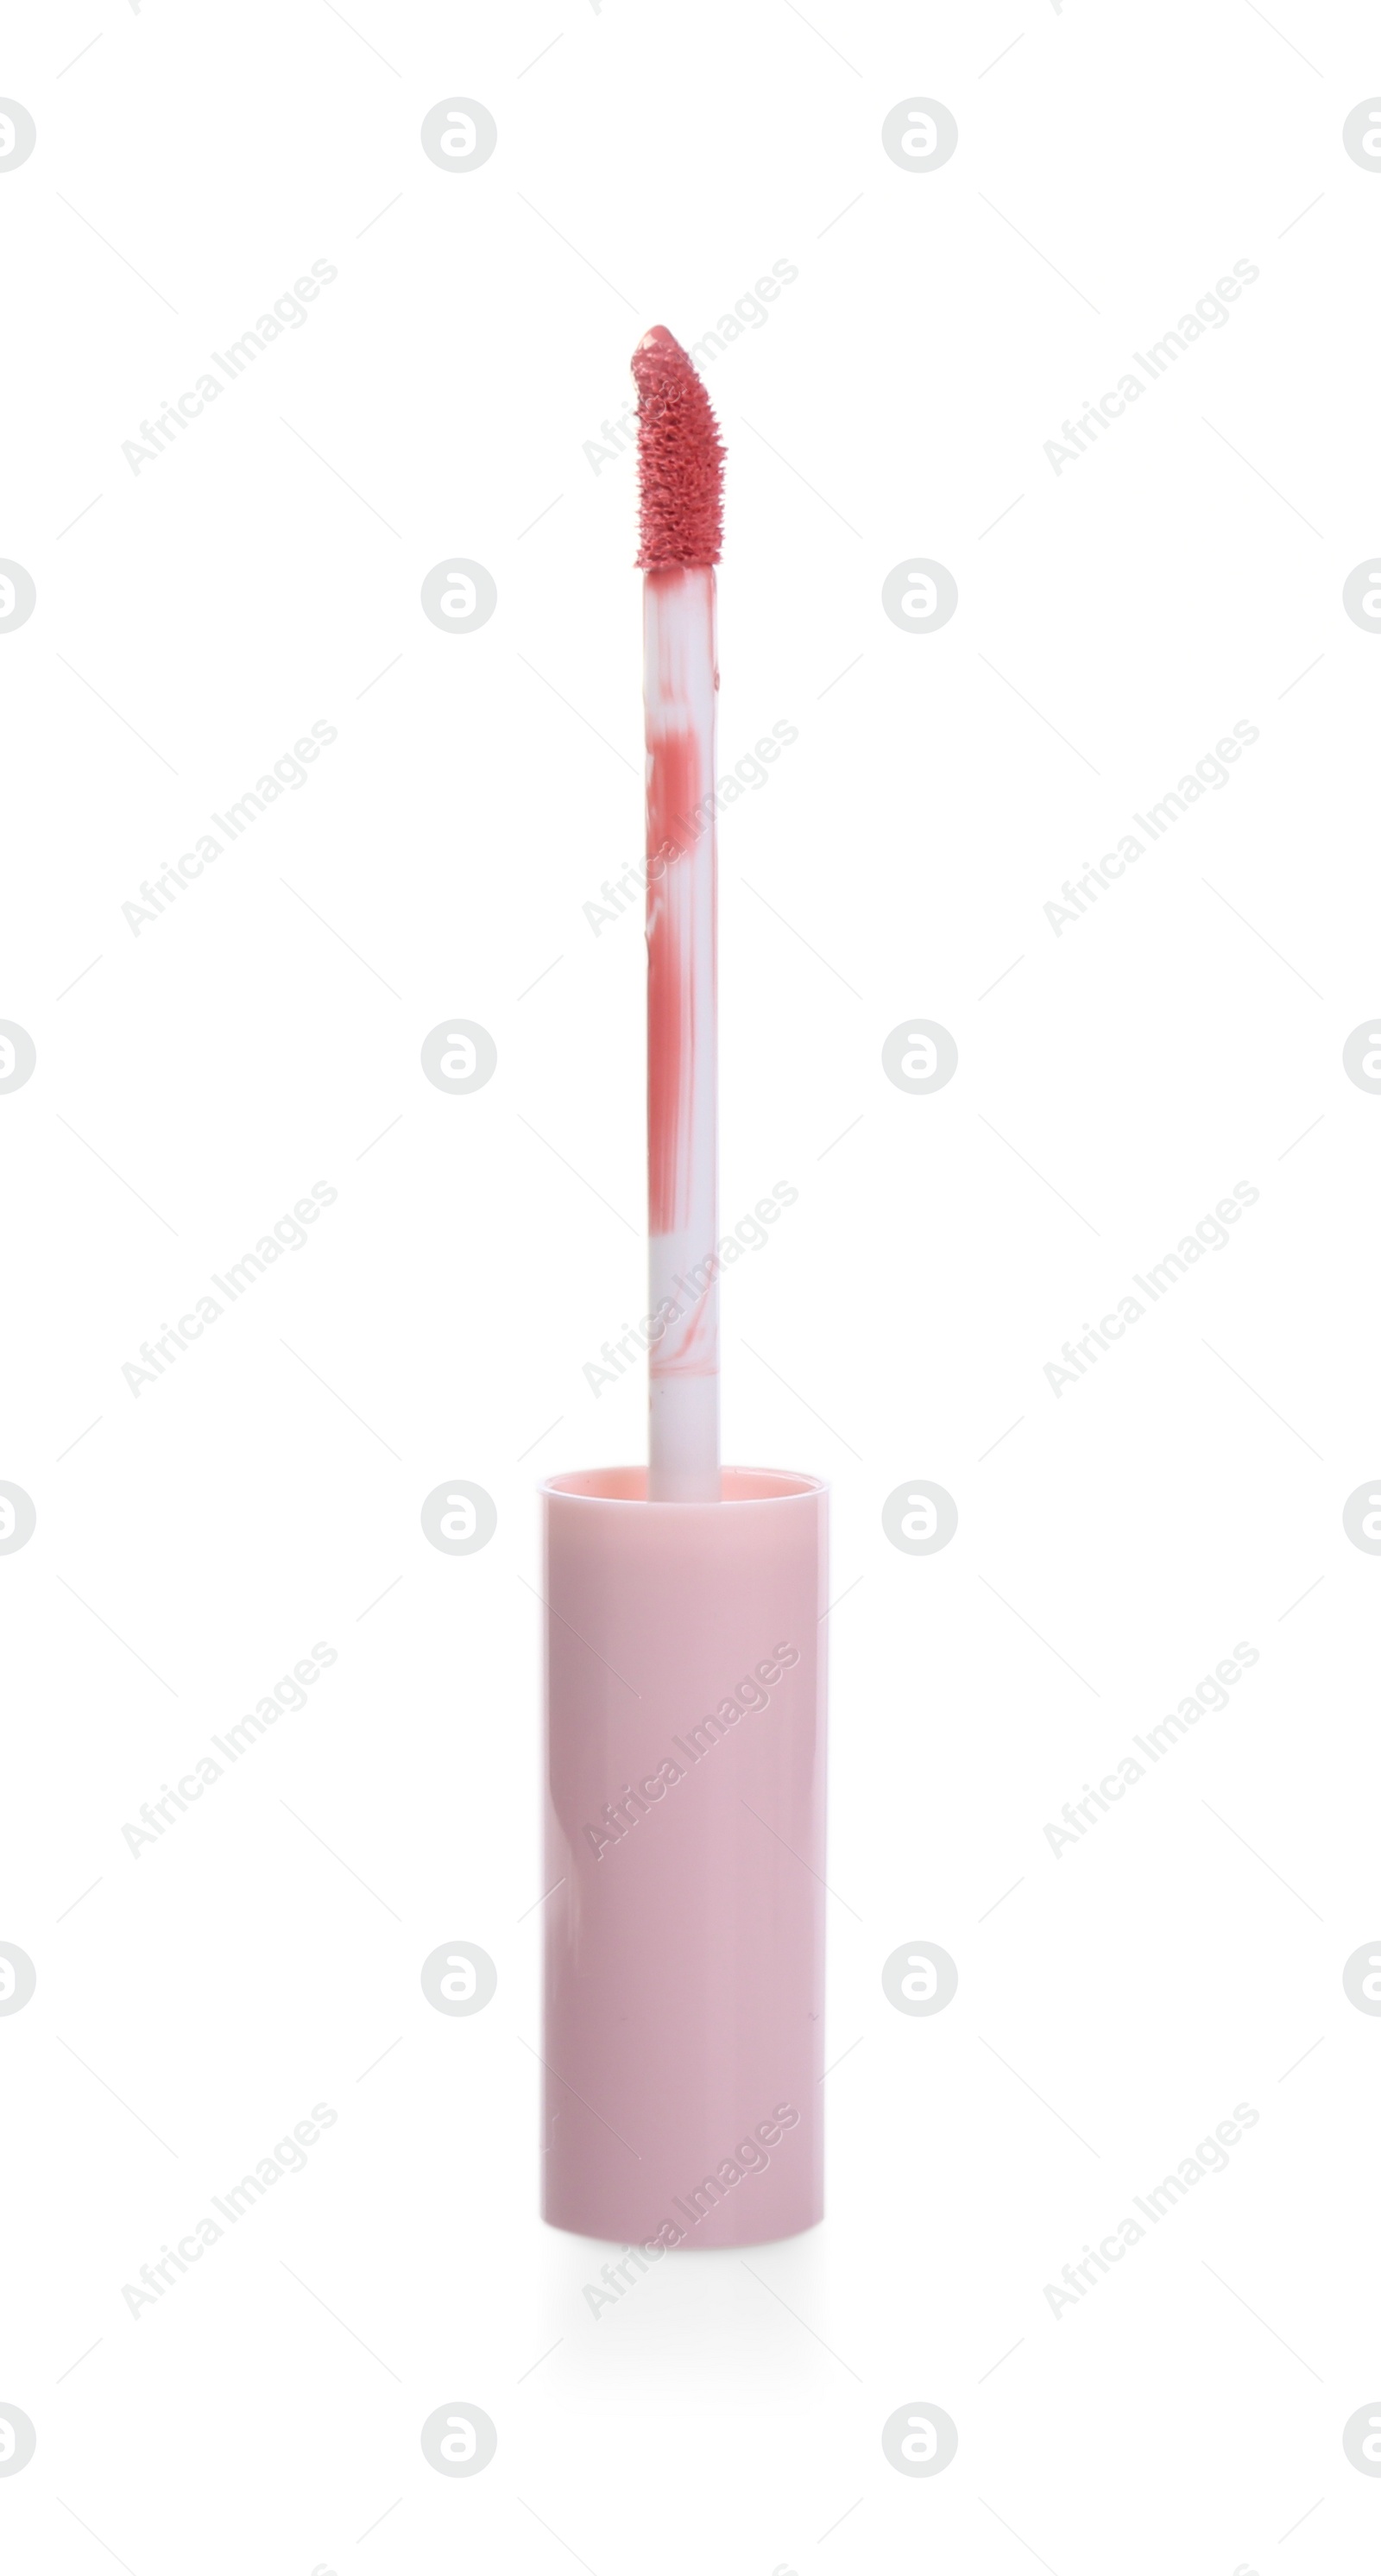 Photo of One lip gloss applicator isolated on white